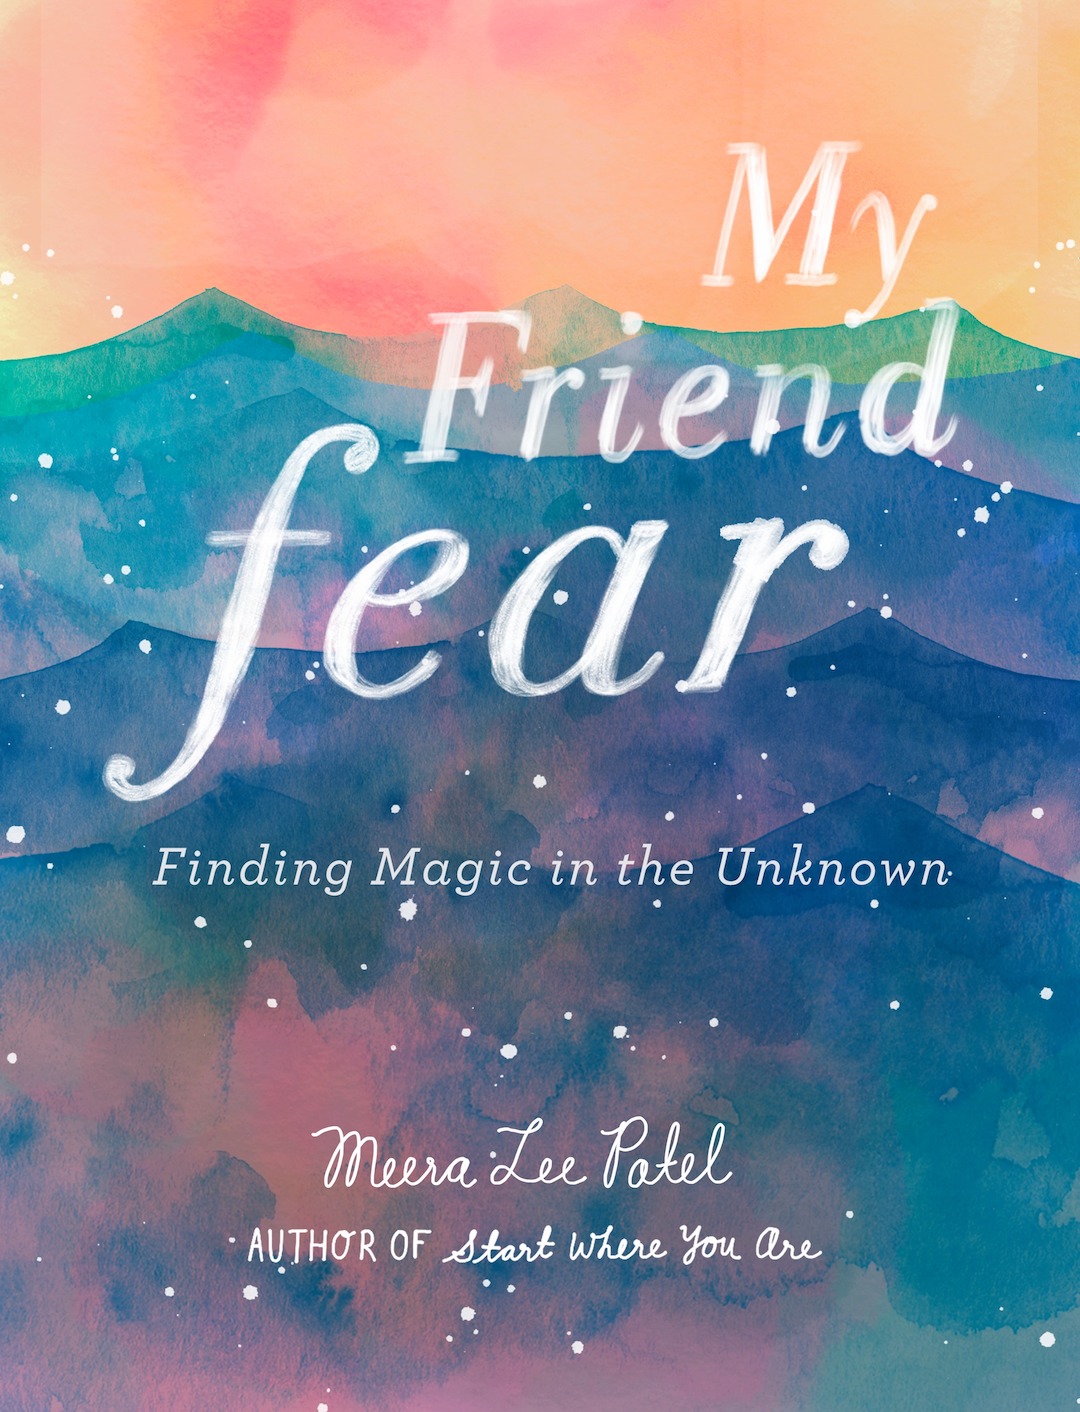 My Friend Fear, an illustrated book by Meera Lee Patel